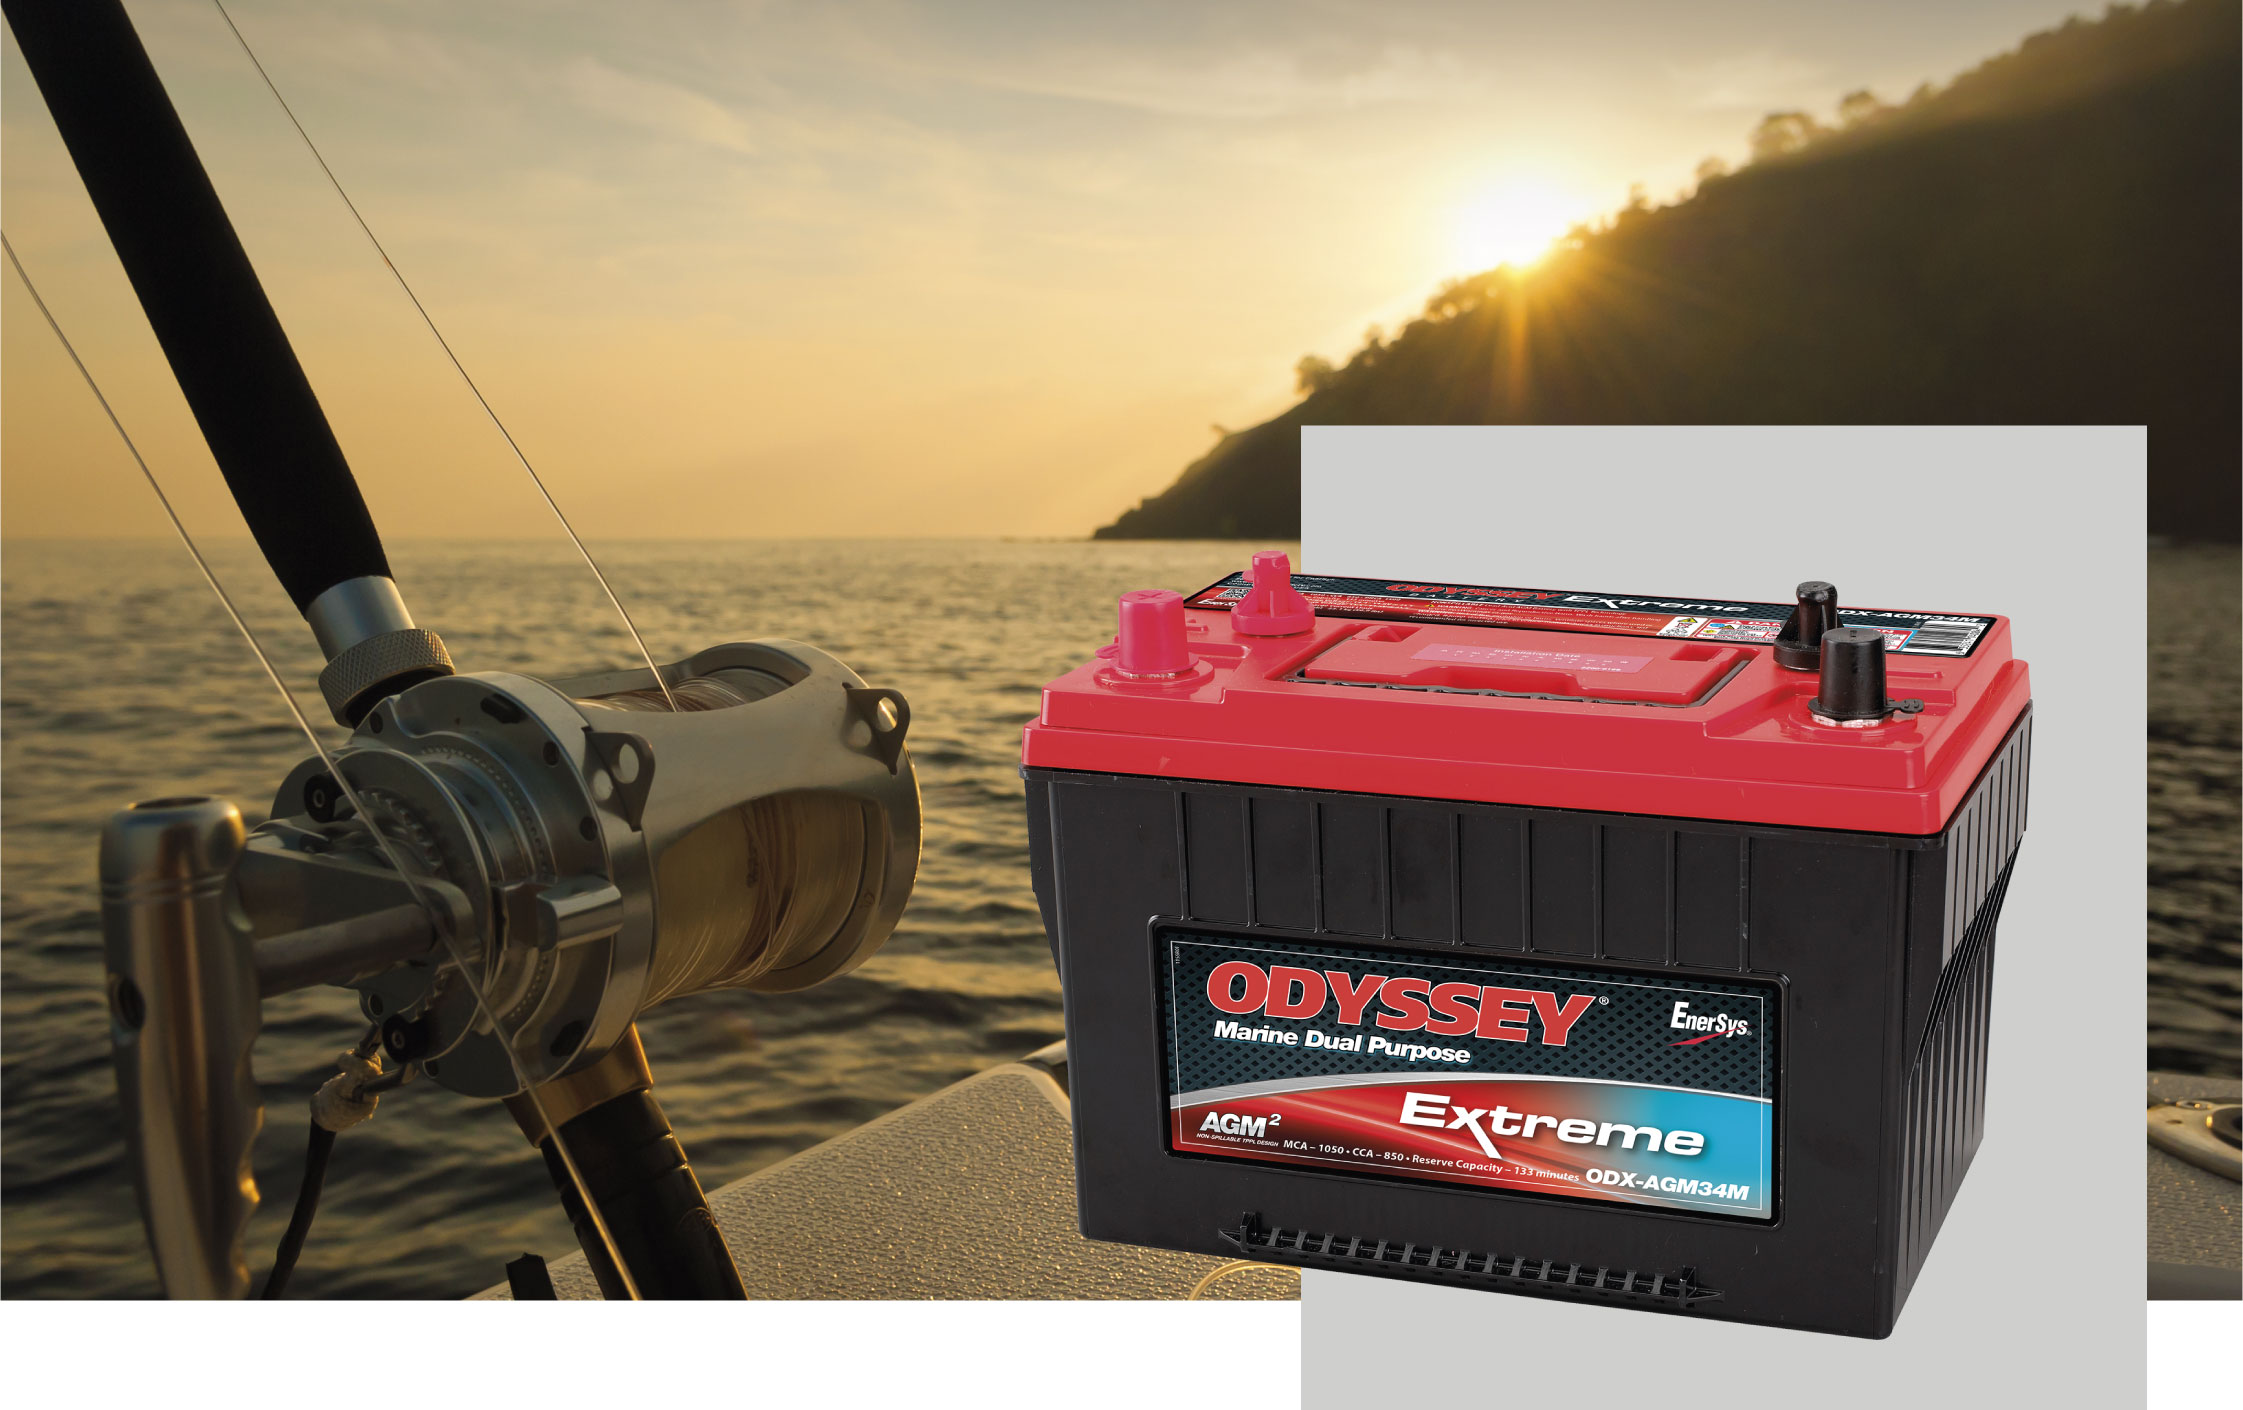 Odyssey fishing product